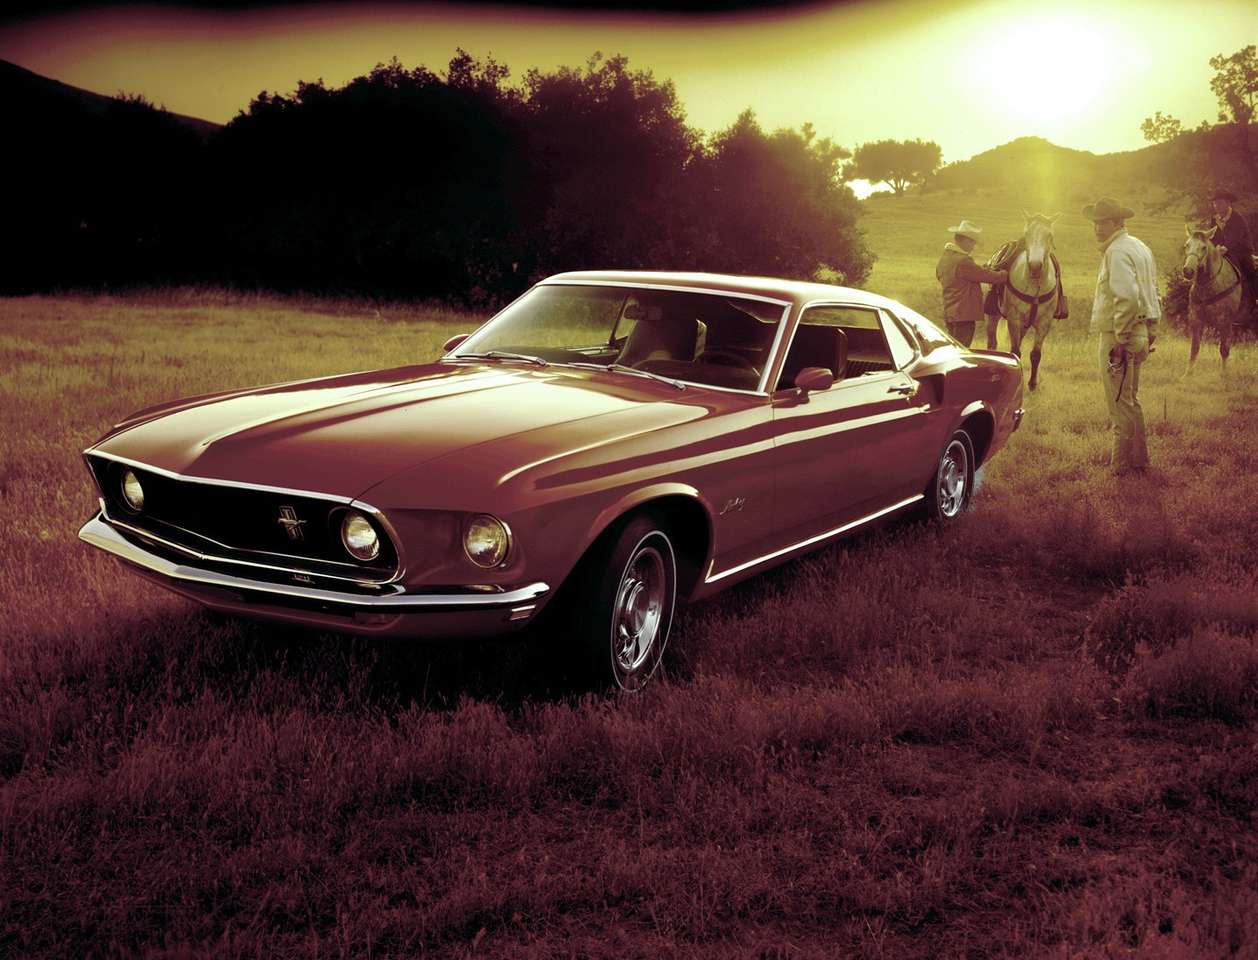 1969 Ford Mustang Fastback Pussel online